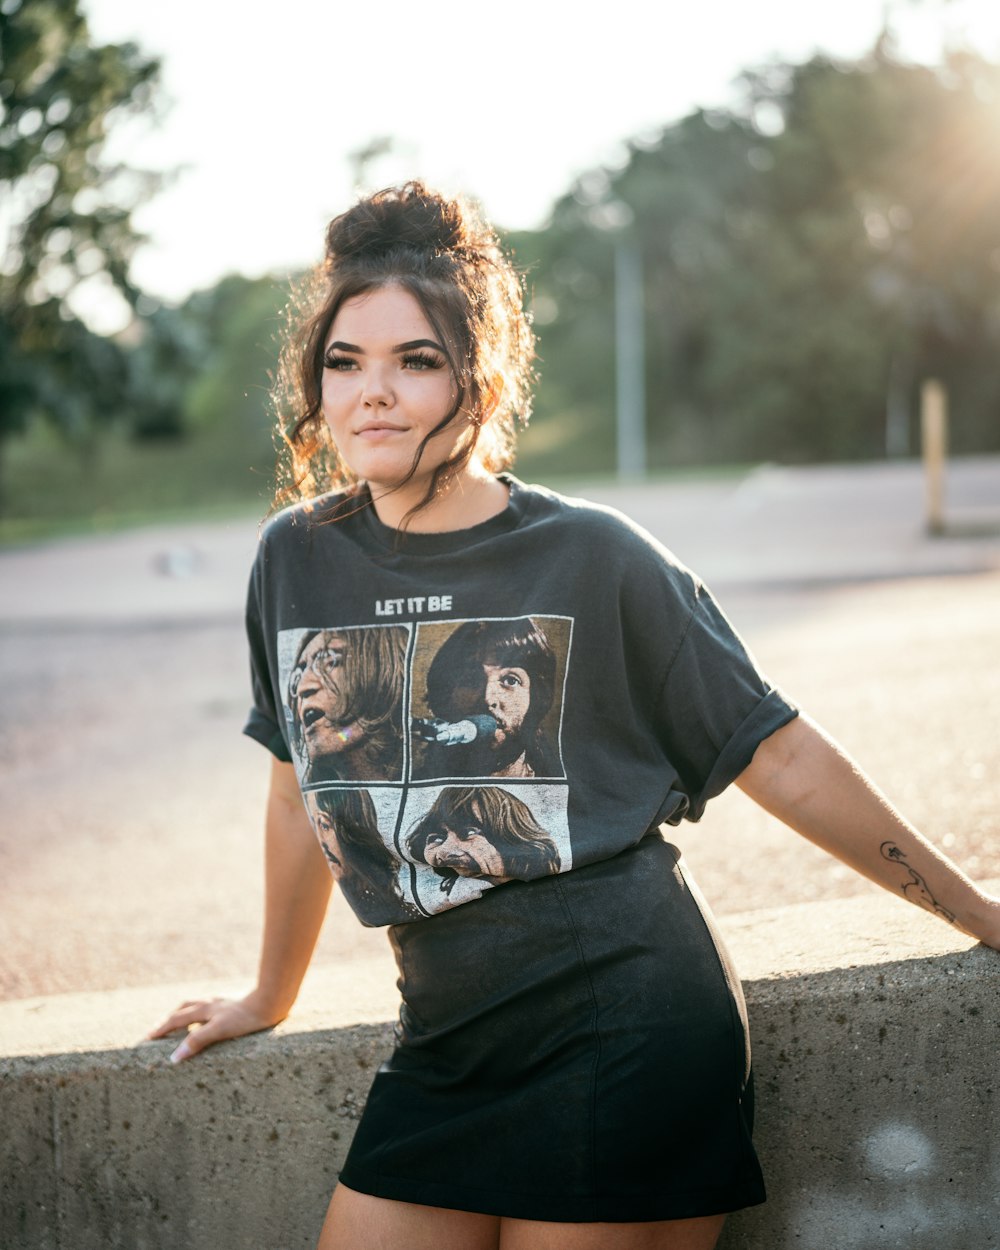 woman in black crew neck t-shirt and black pants standing on gray concrete road during